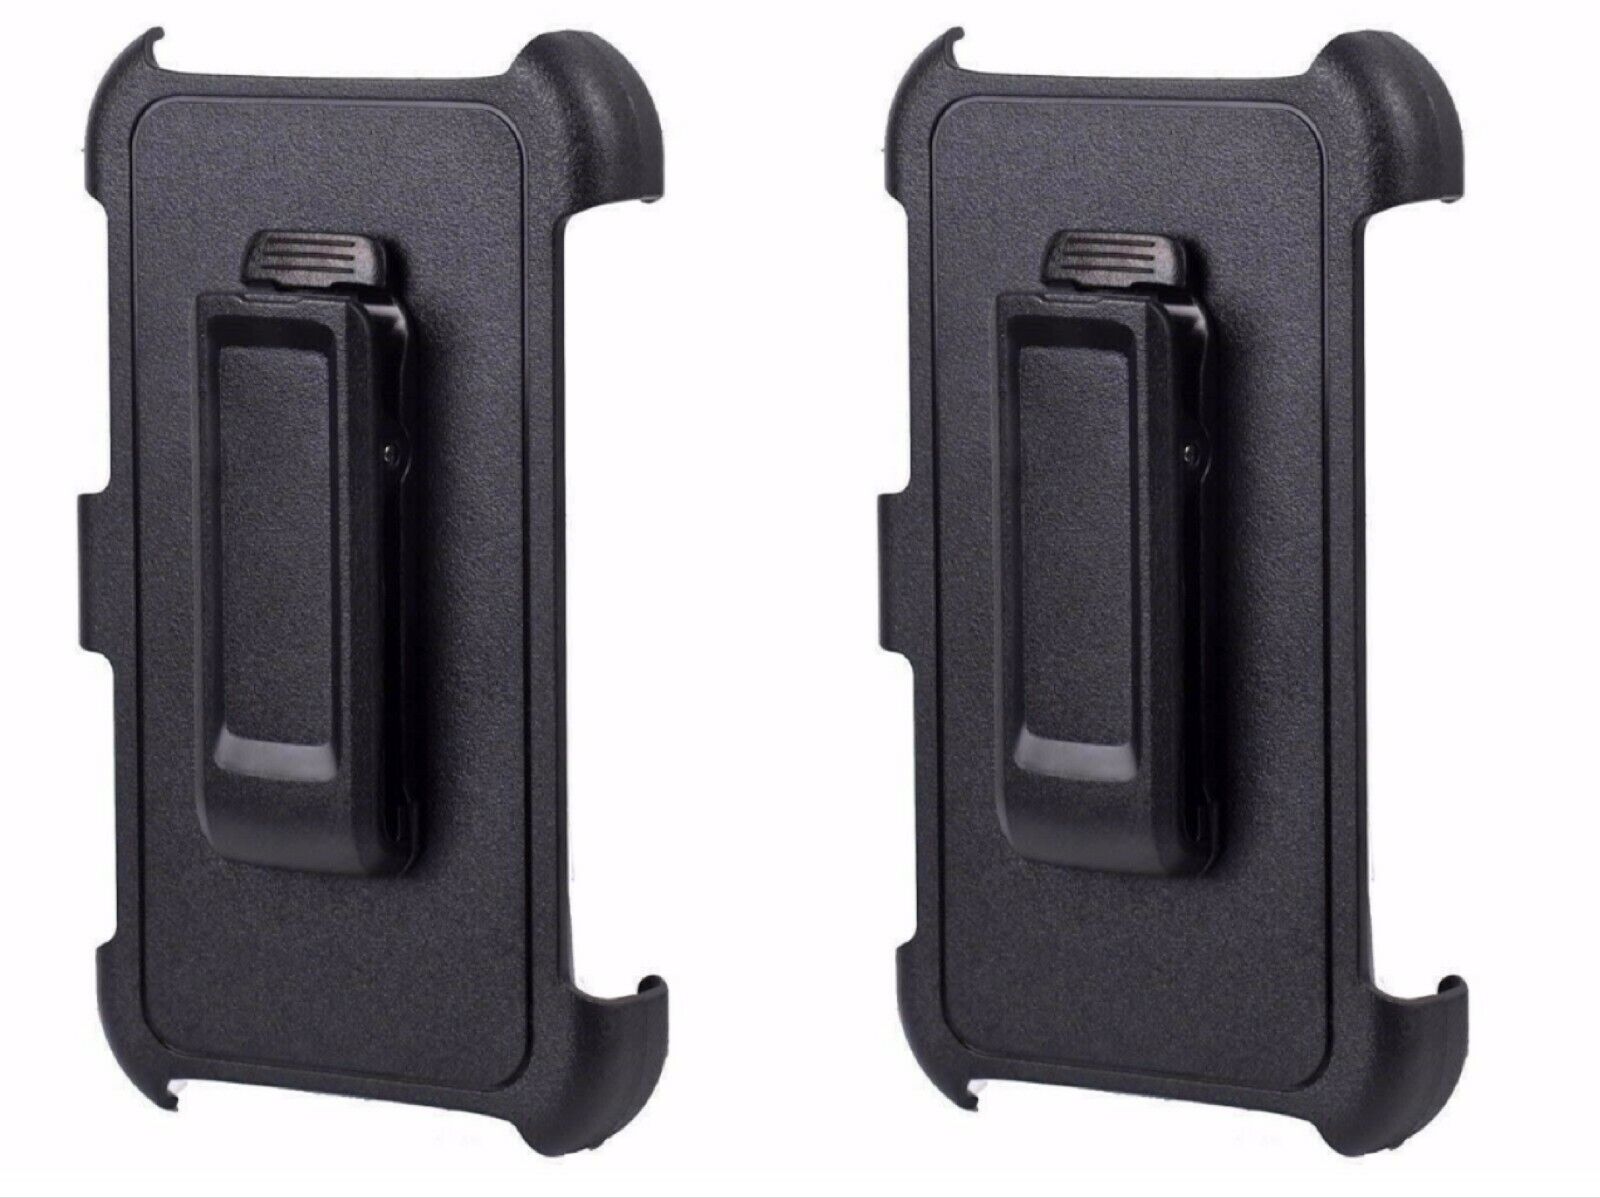 2x NEW Holster Belt Clip For Samsung Galaxy Note 9 Otterbox Defender Series Case Unbranded/Generic Does Not Apply